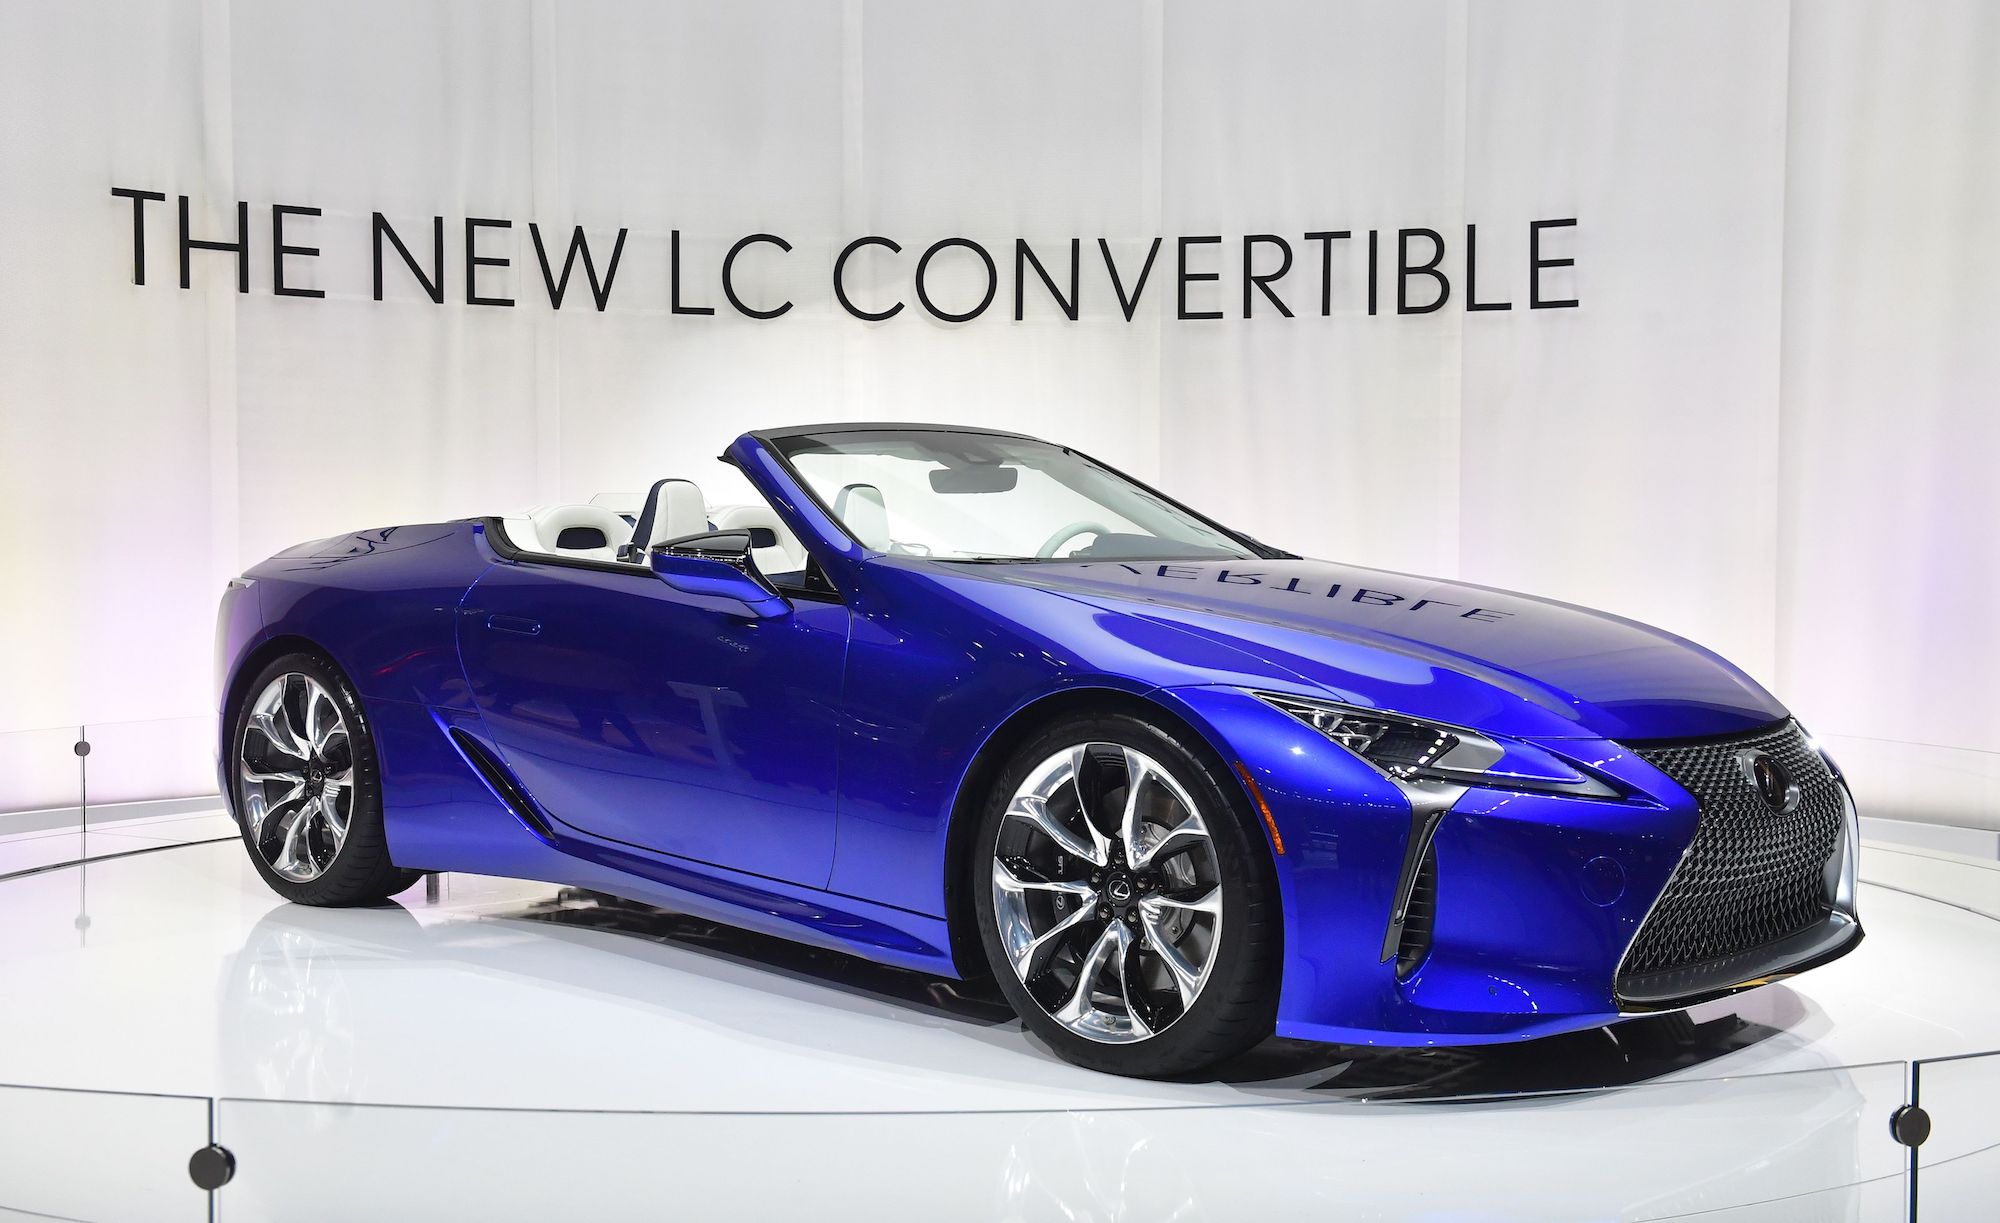 The 2020 Lexus LC-500 Convertible on display at the 2019 Los Angeles Auto Show